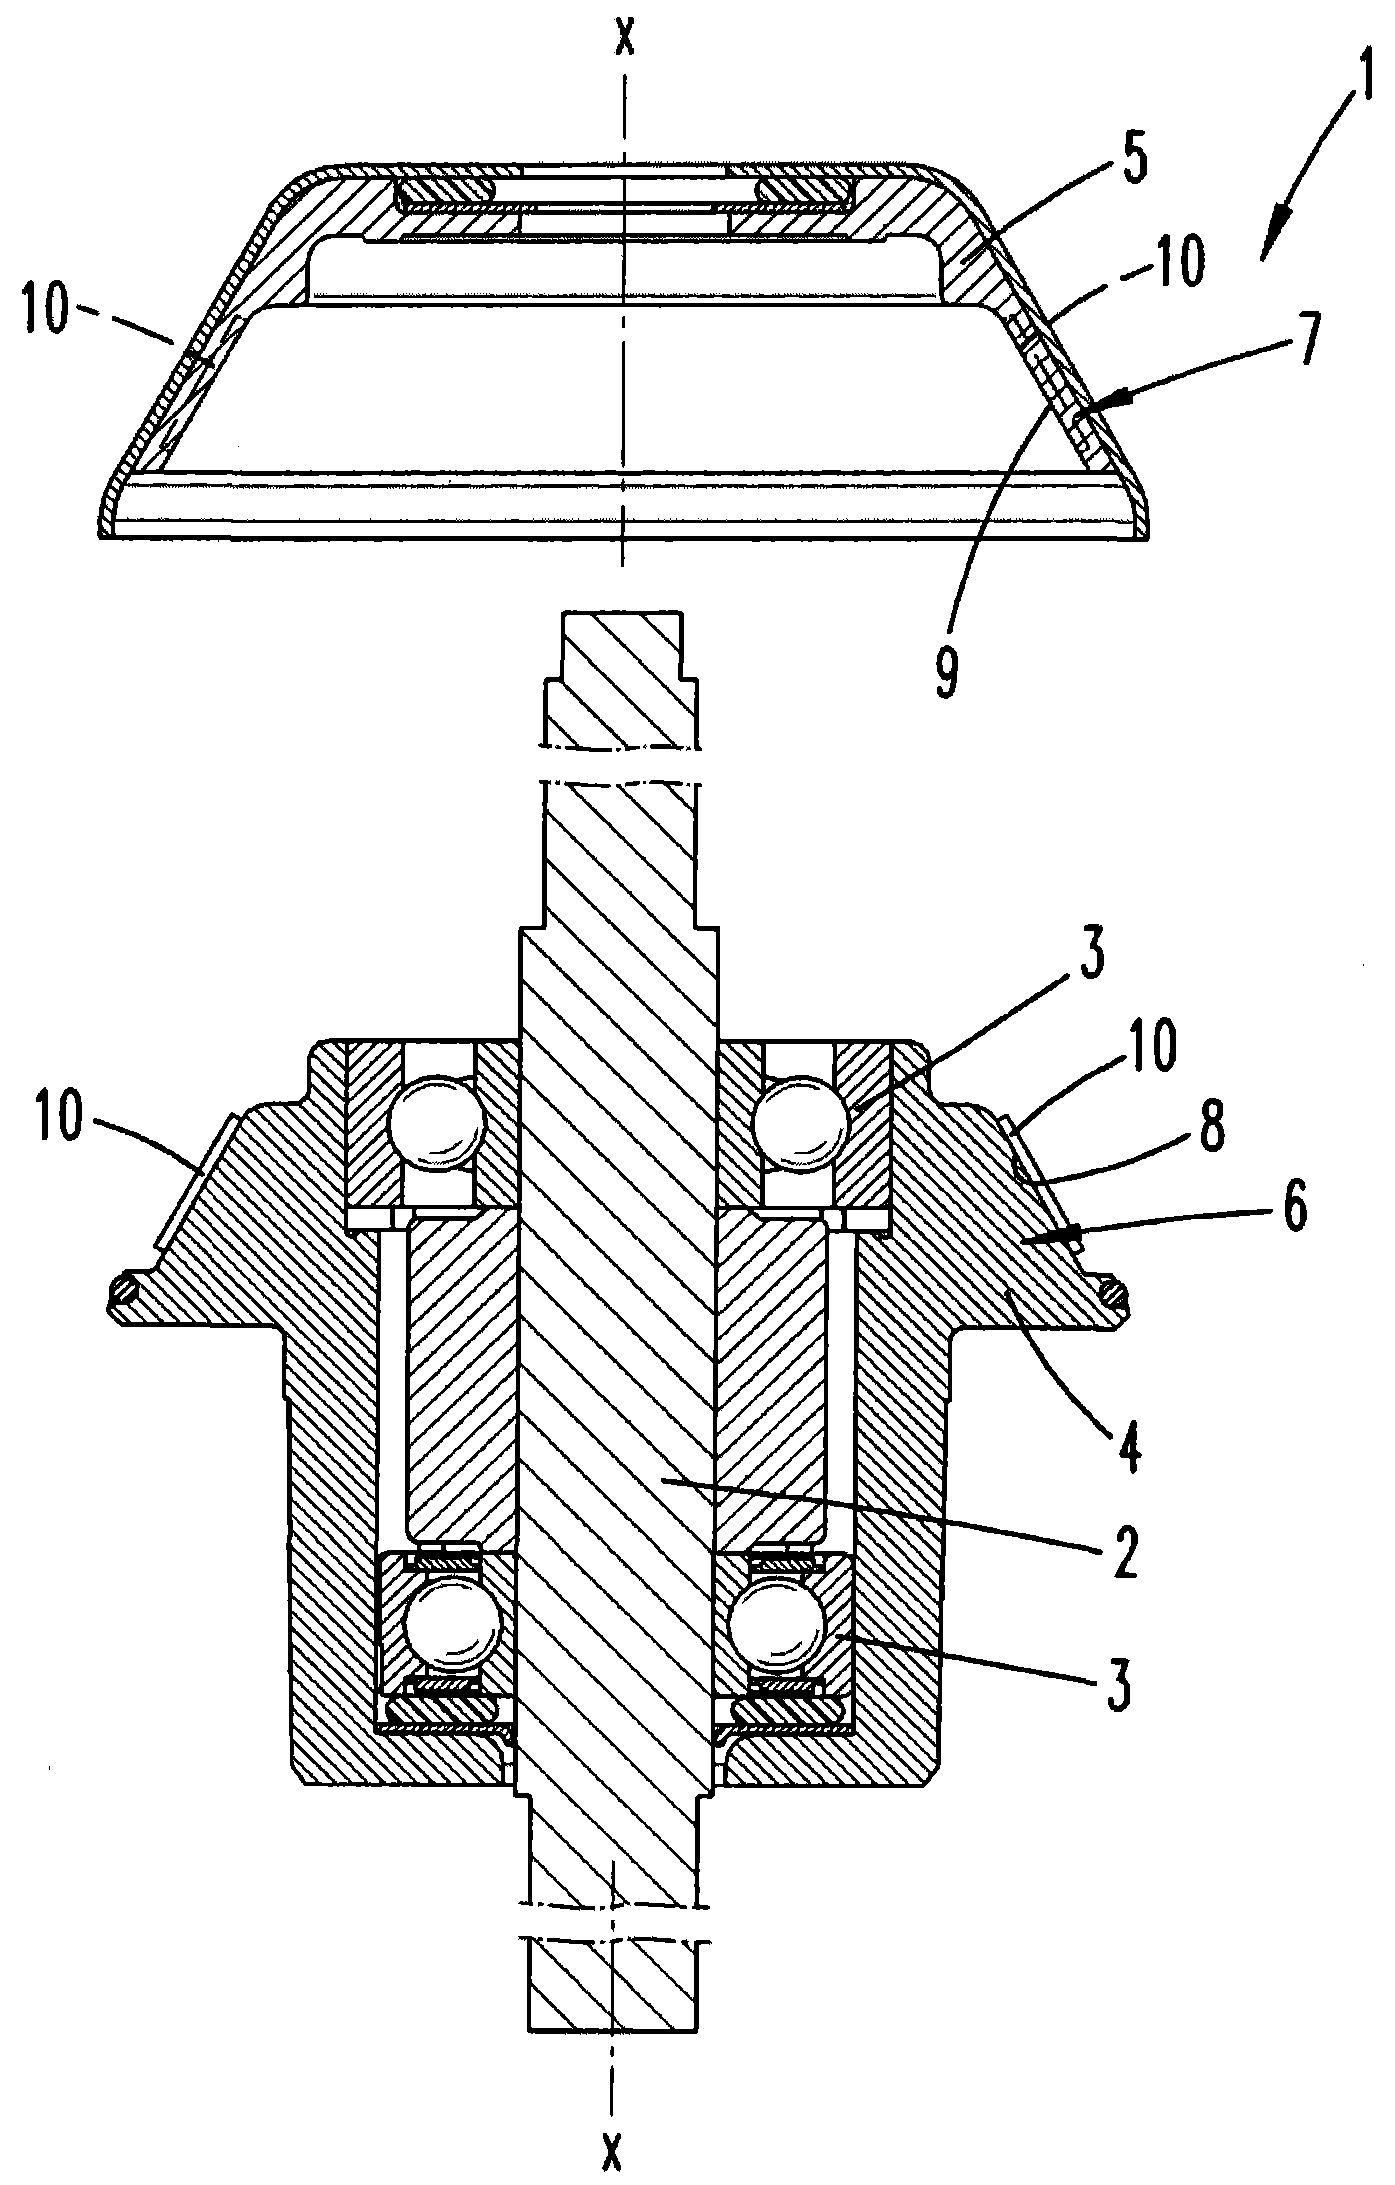 Method for bonding one adhesive member with a second adhesive member and adhesive partner or knife bearing